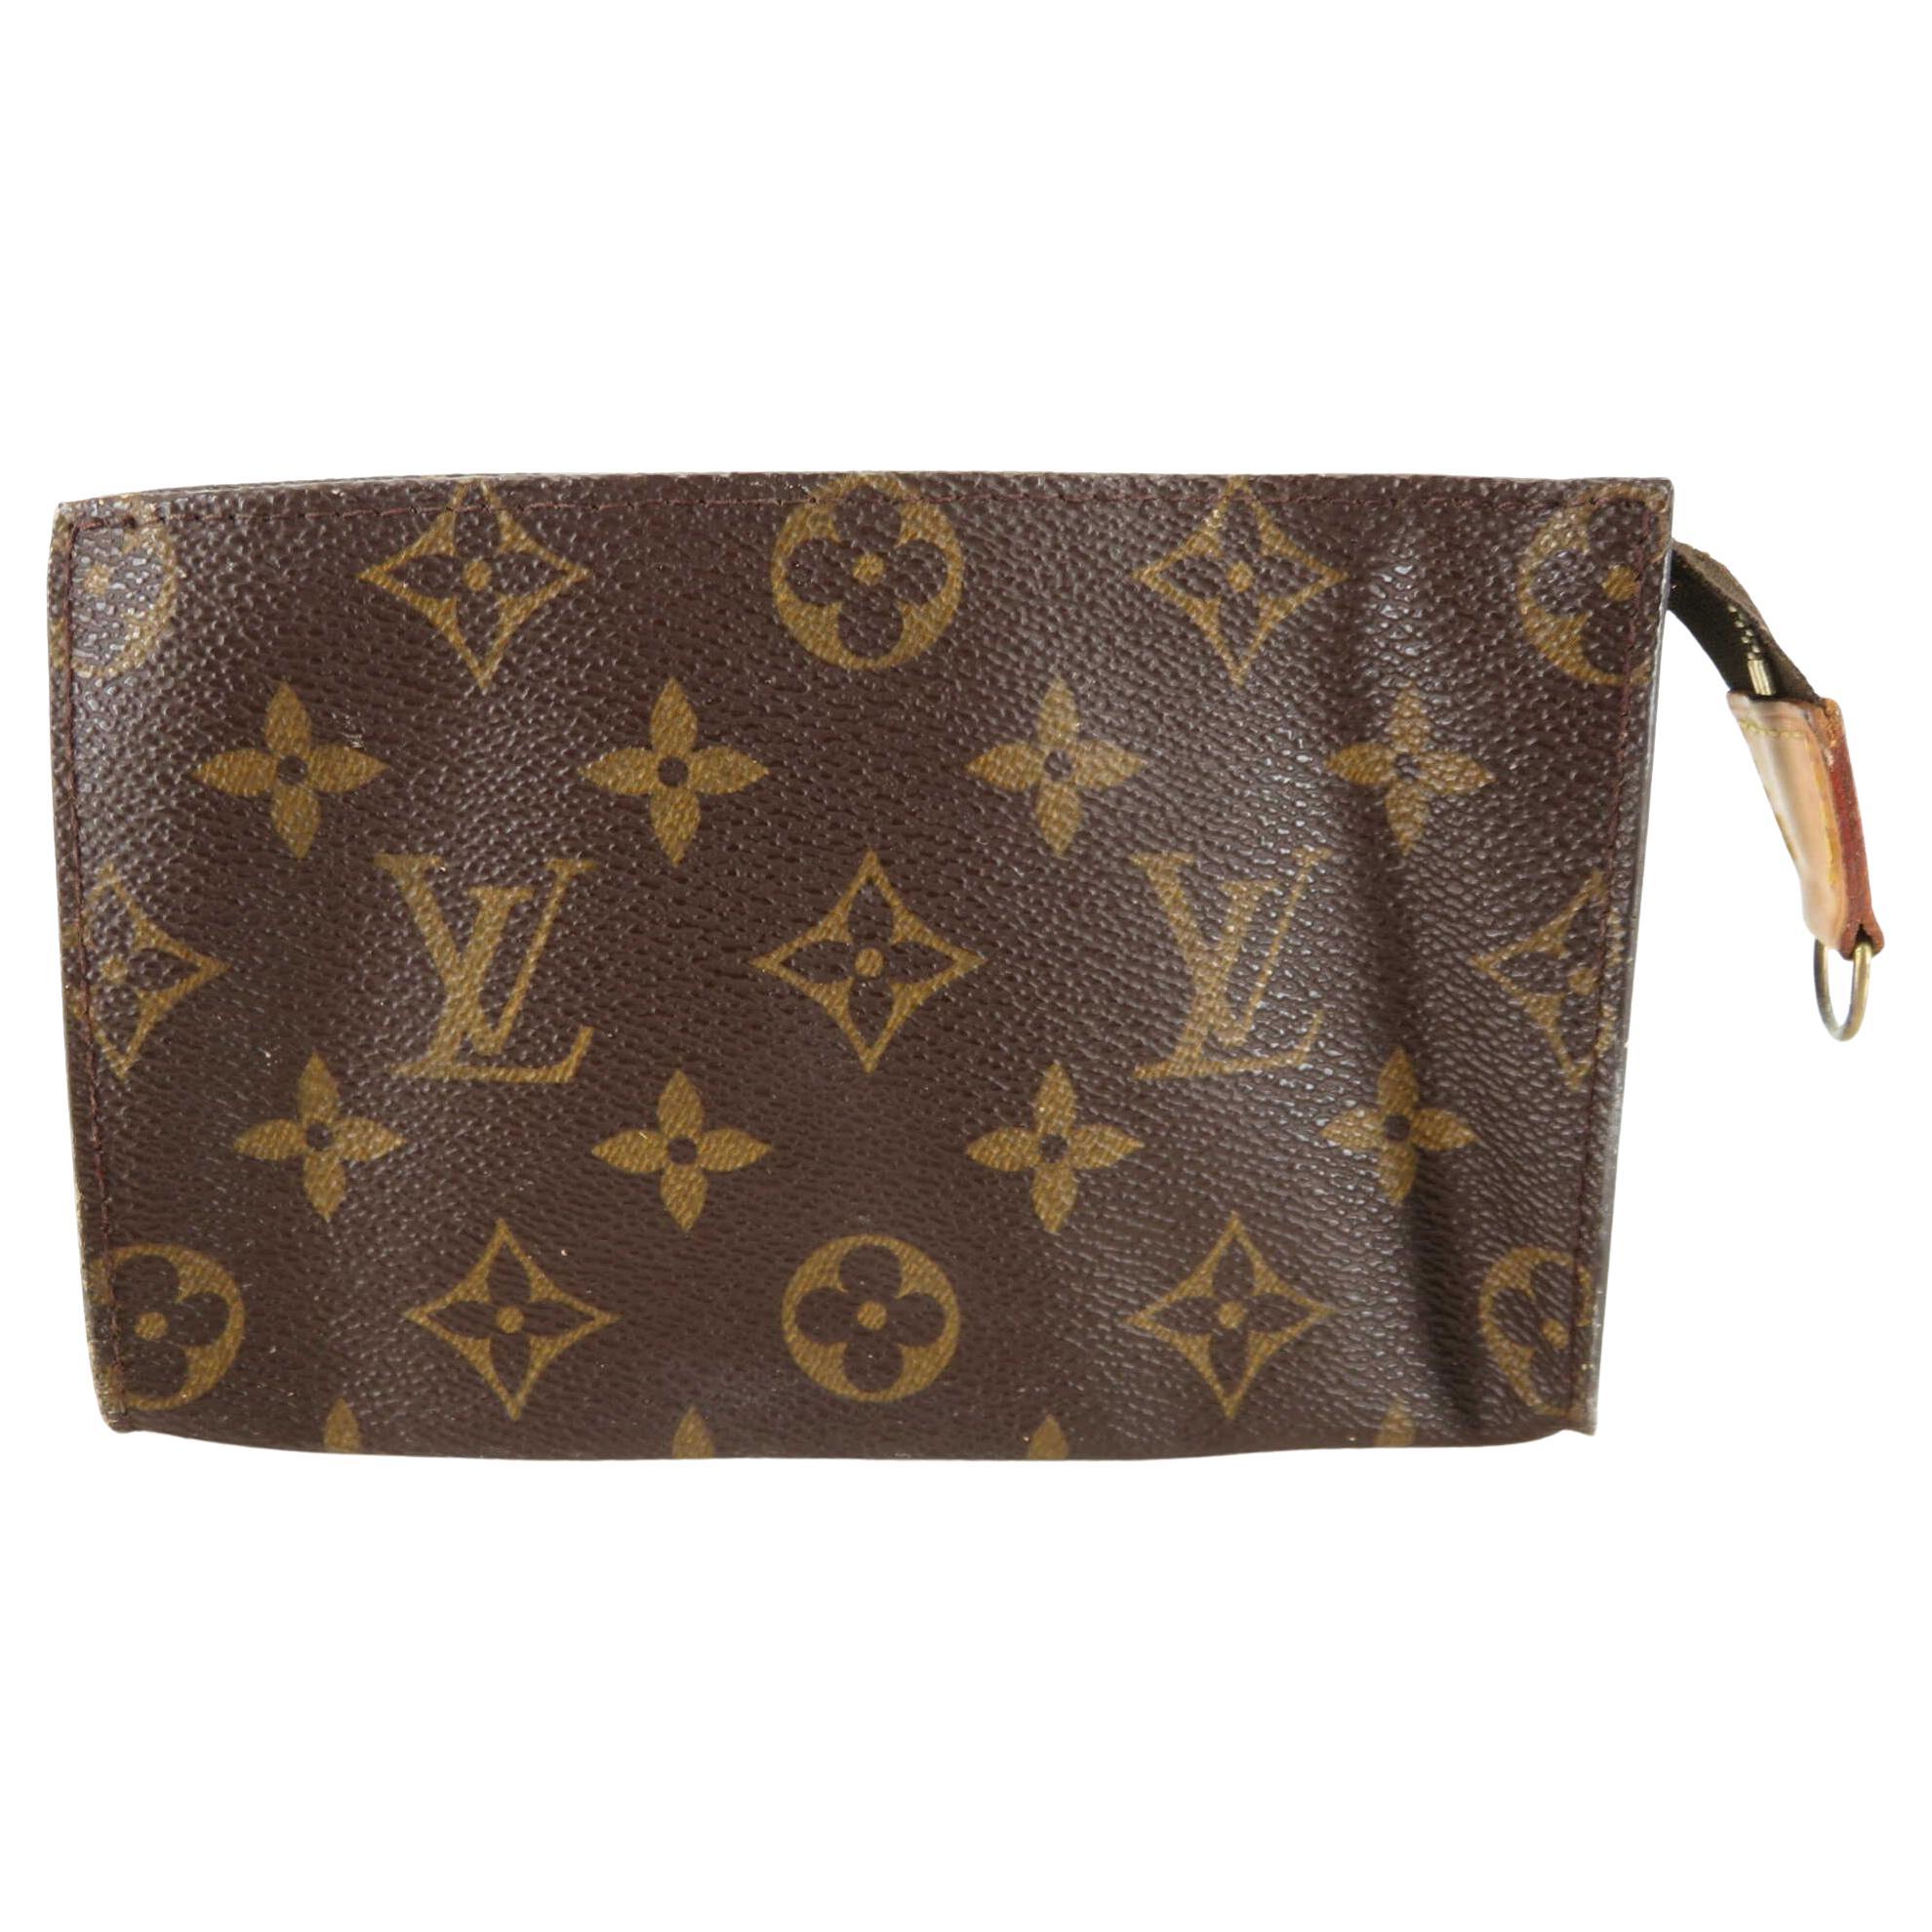 Brown and tan monogram coated canvas Louis Vuitton Toiletry Pouch 15 cm